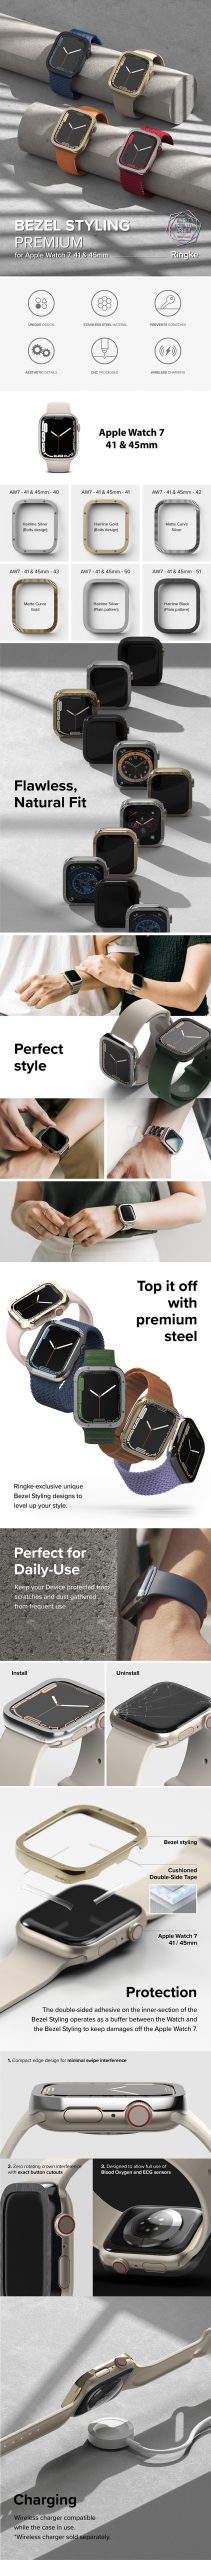 Bezel Styling Premium NEW DESIGN for Apple Watch 7 ringkevietnam scaled